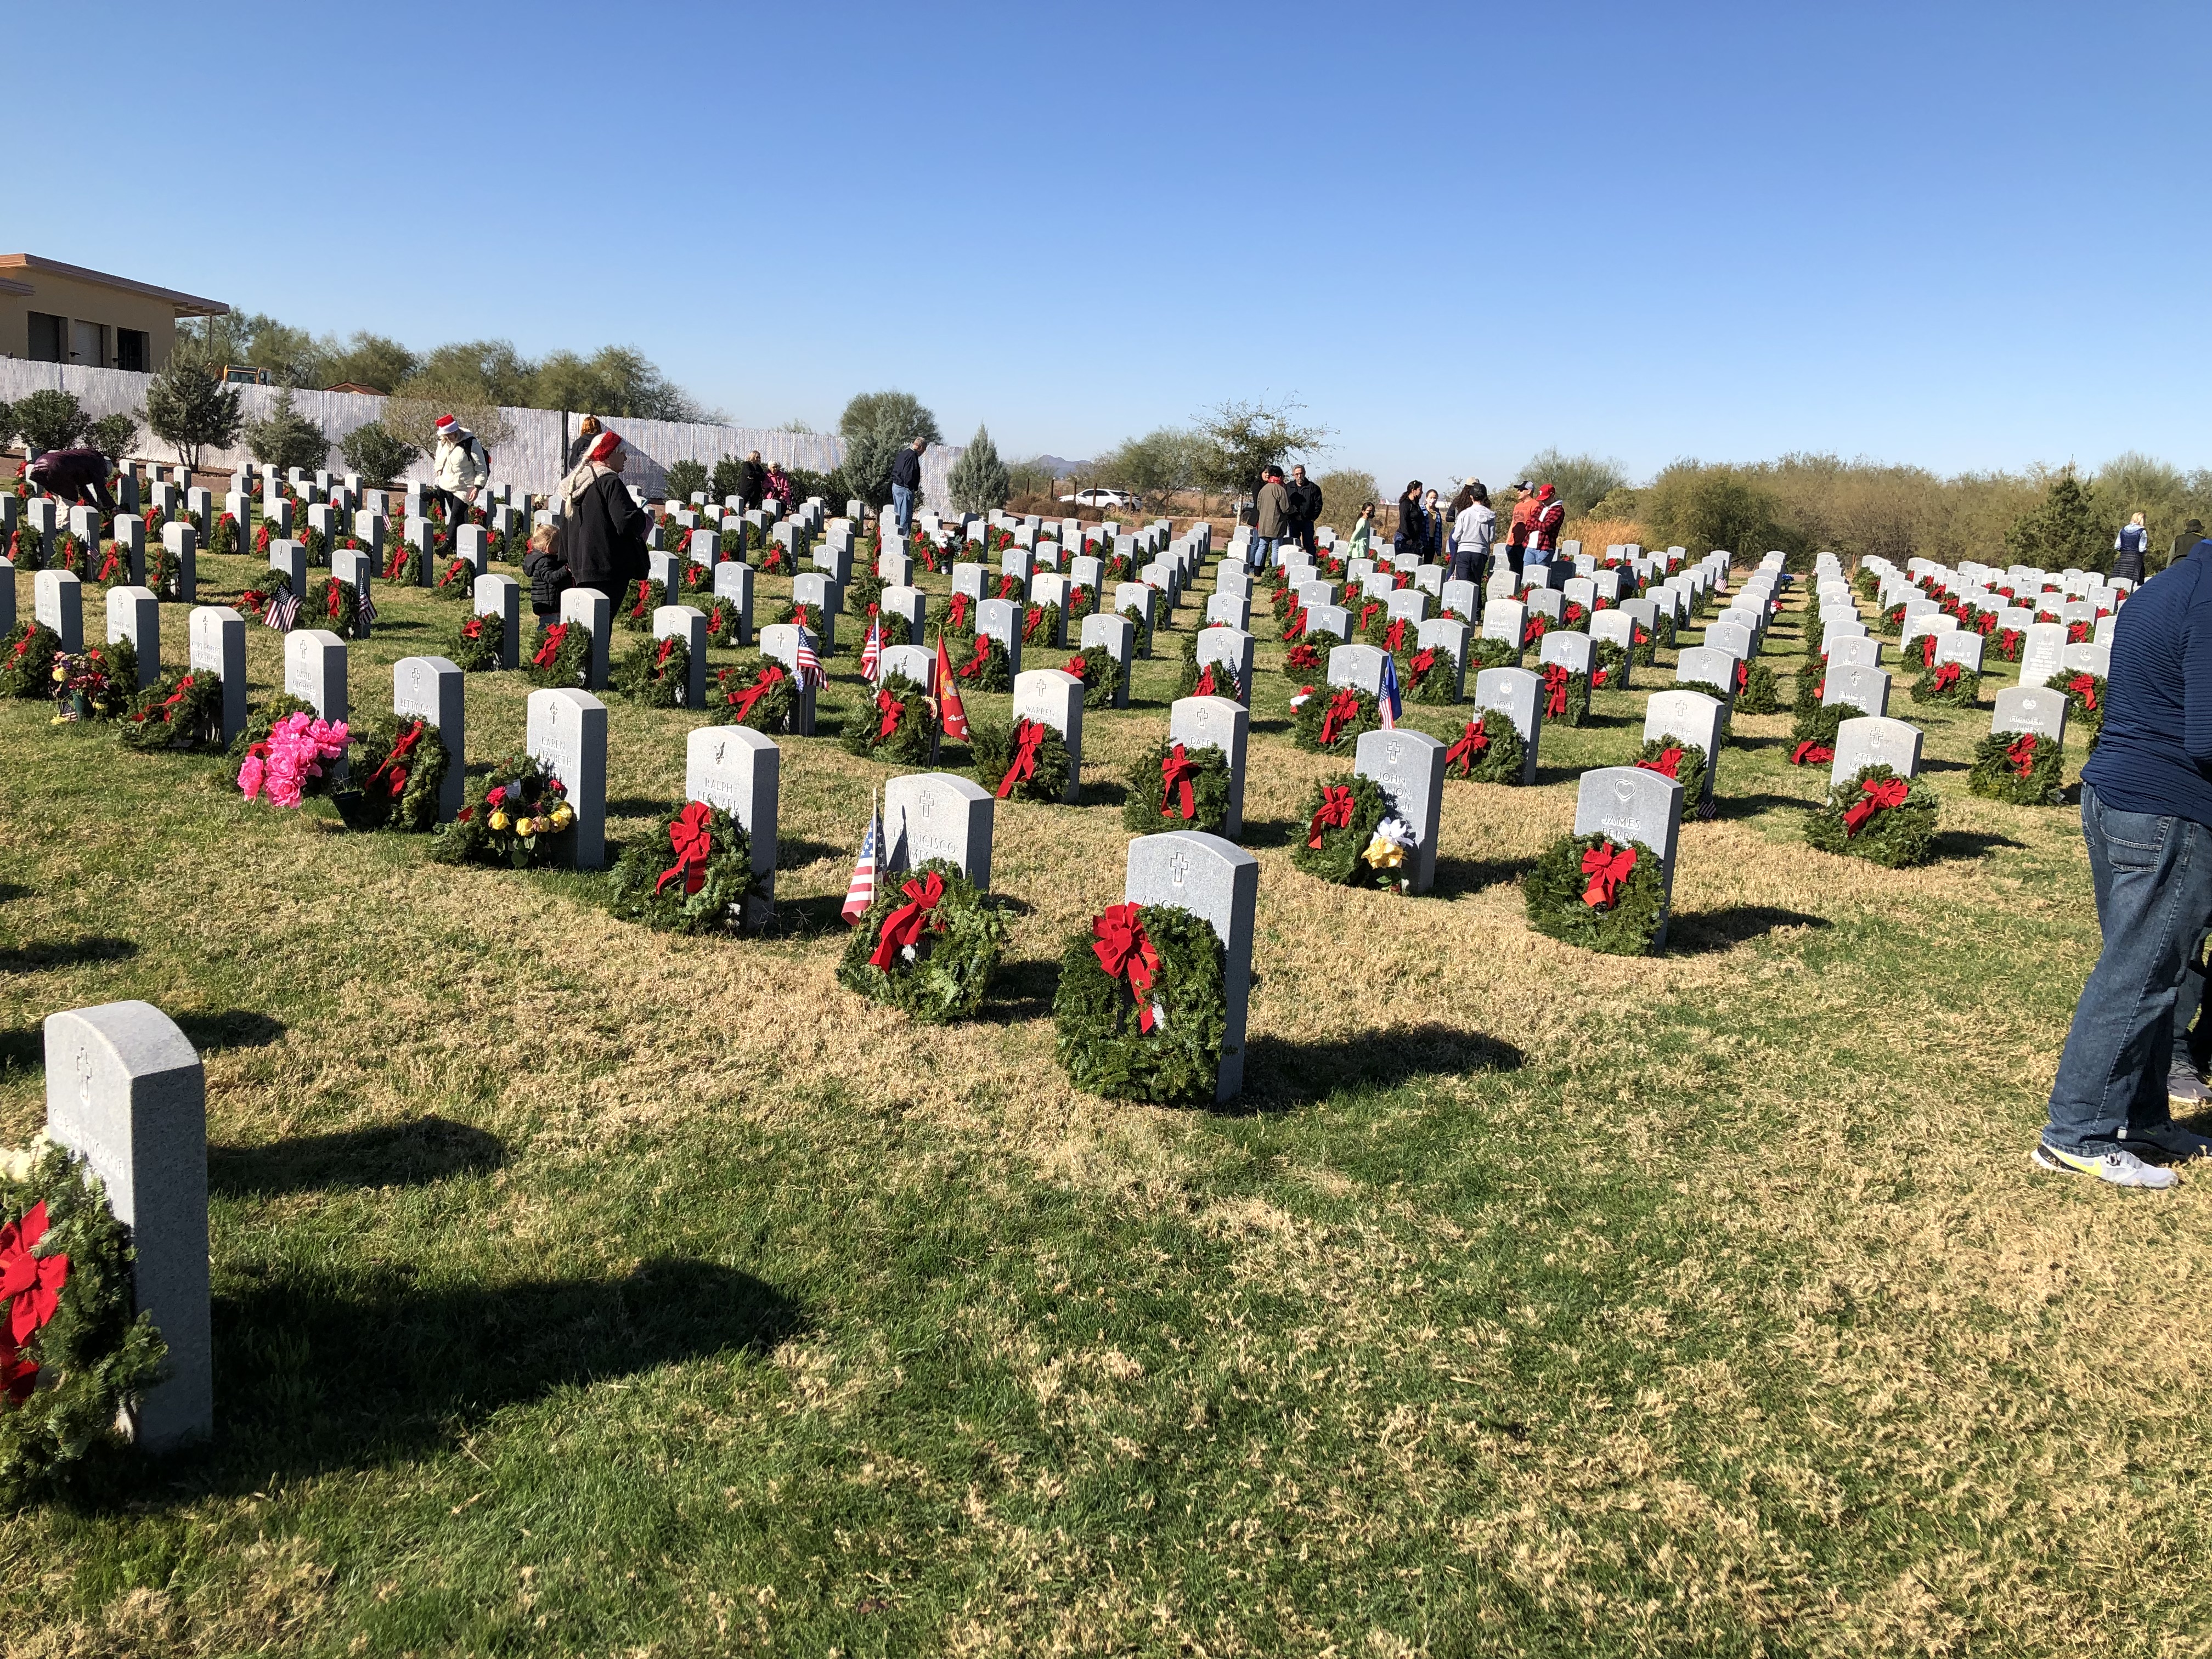 headstones with Christmas wreaths